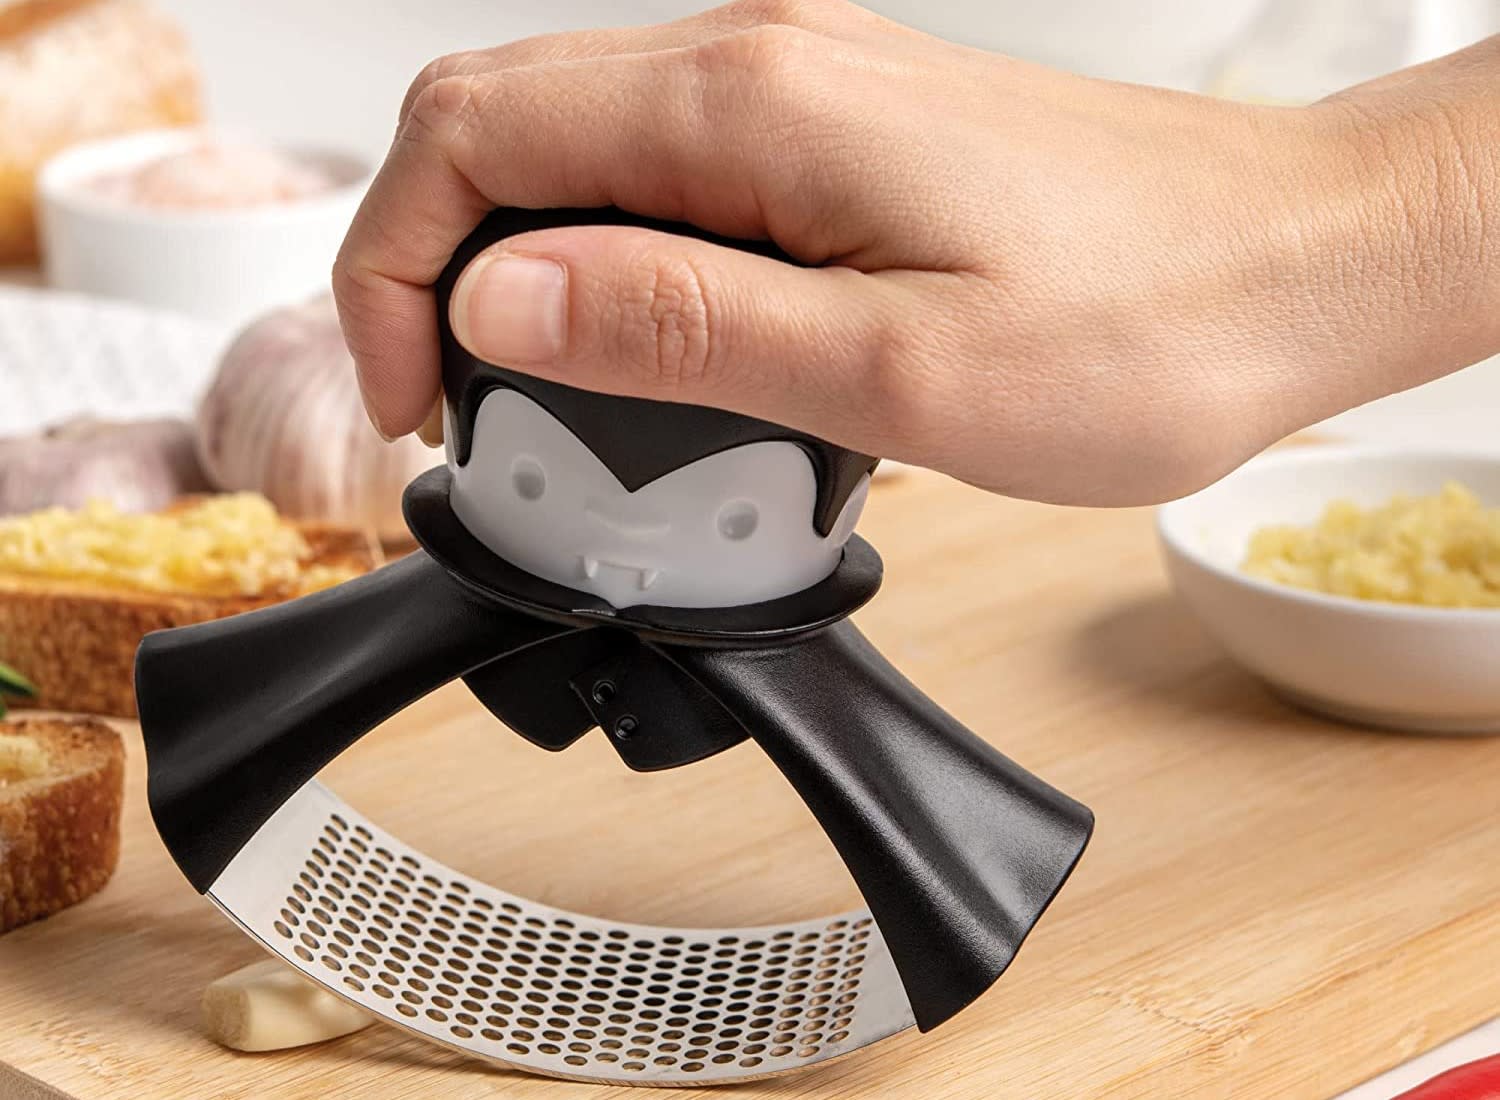 Make meals easier with these kitchen gadgets